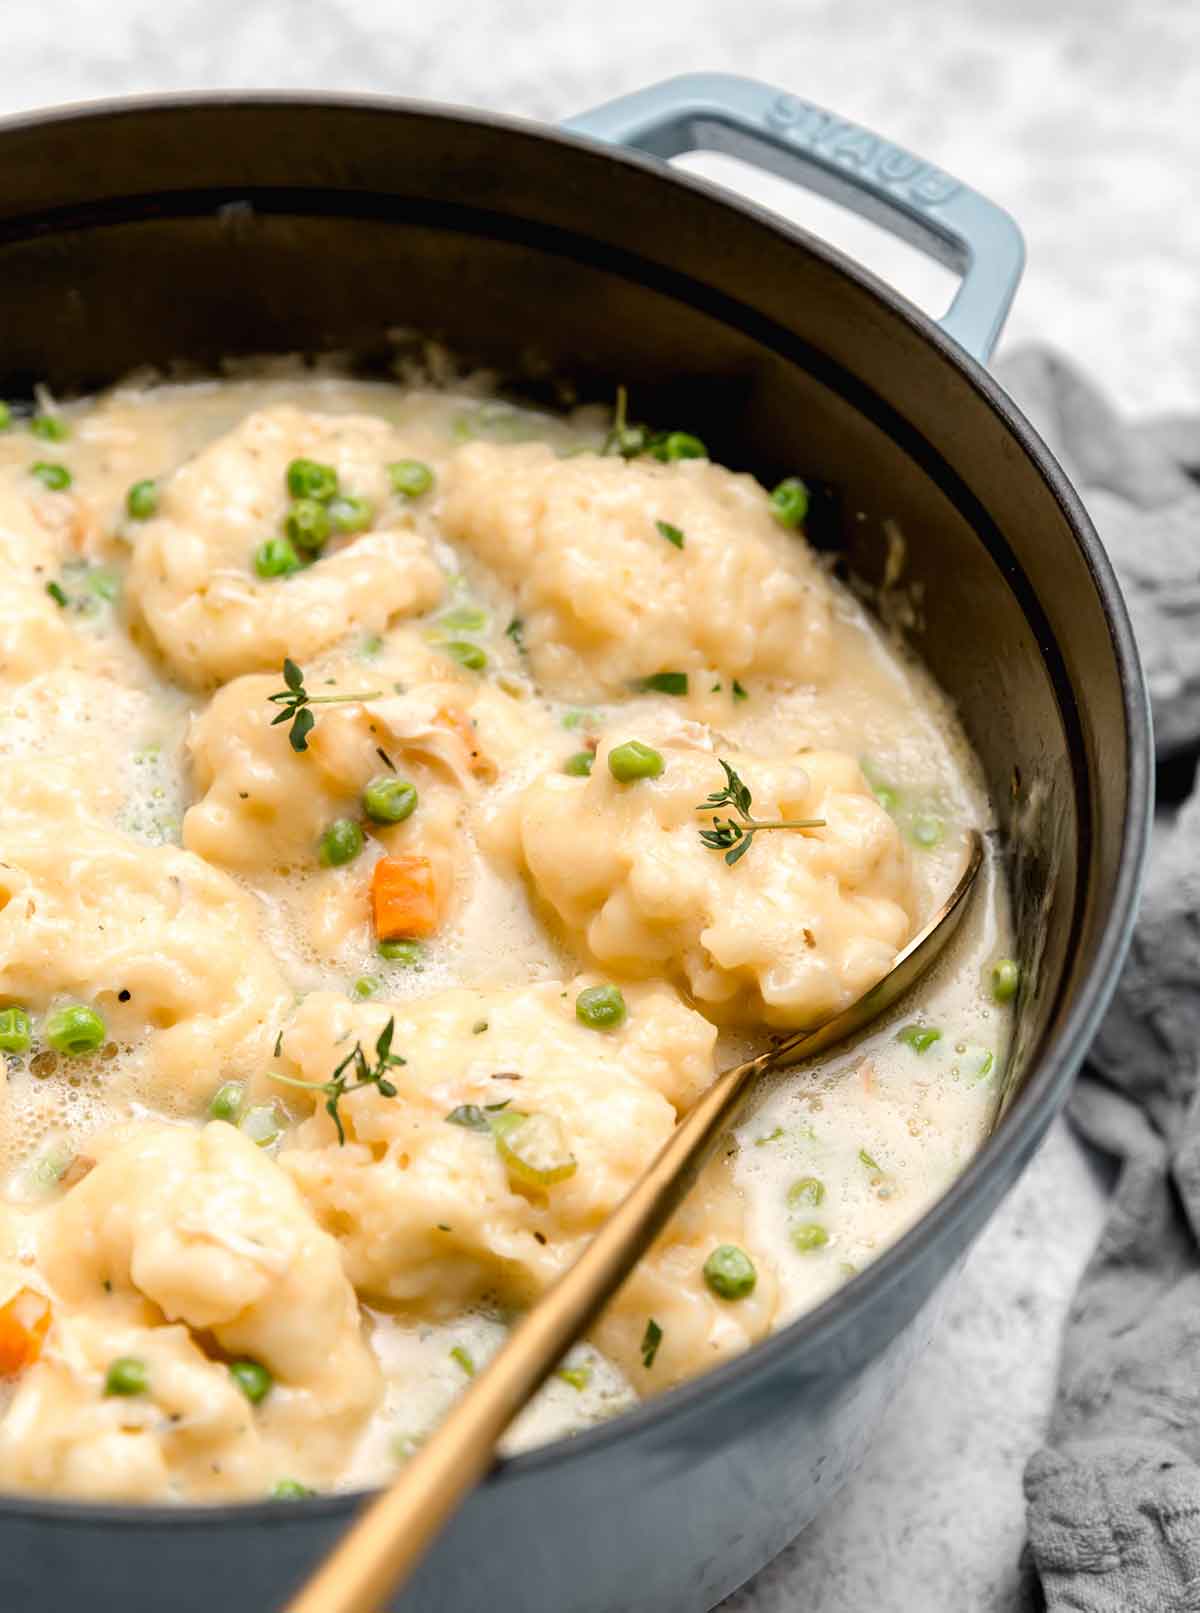 Pot of chicken and dumplings with a metal spoon tucked underneath a dumpling.